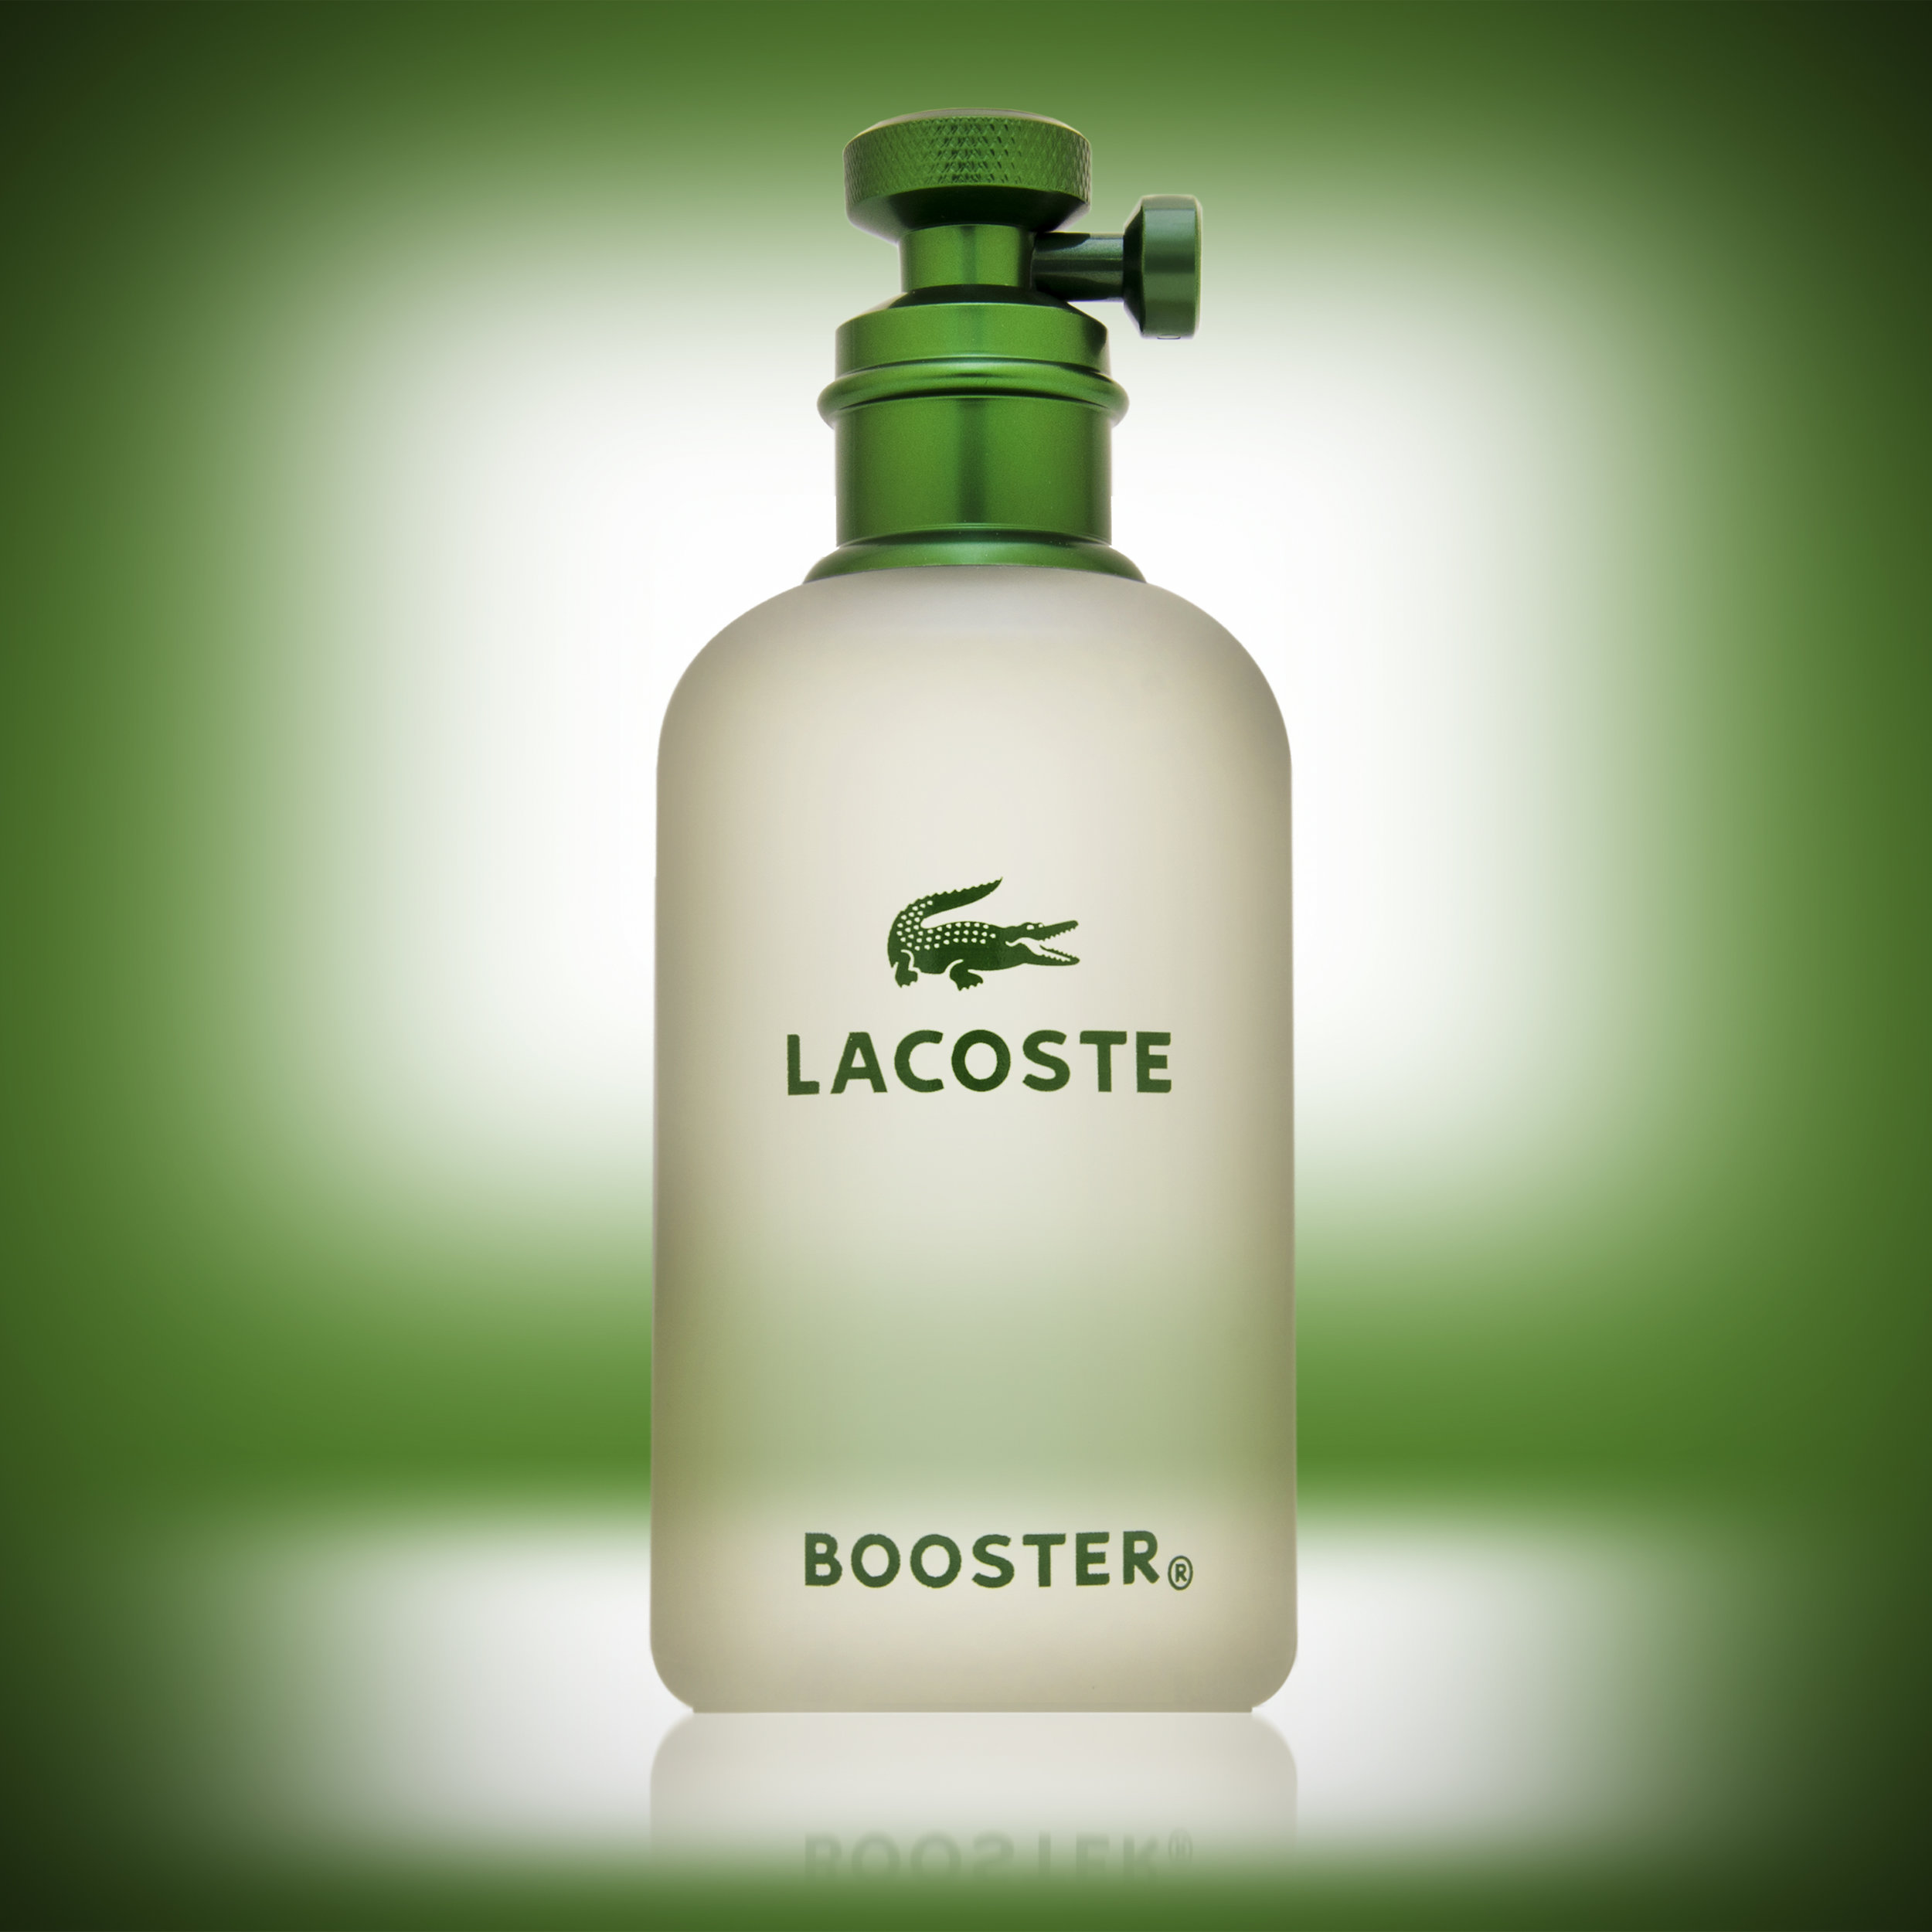 Lacoste Booster - by Andrew Werner.jpg